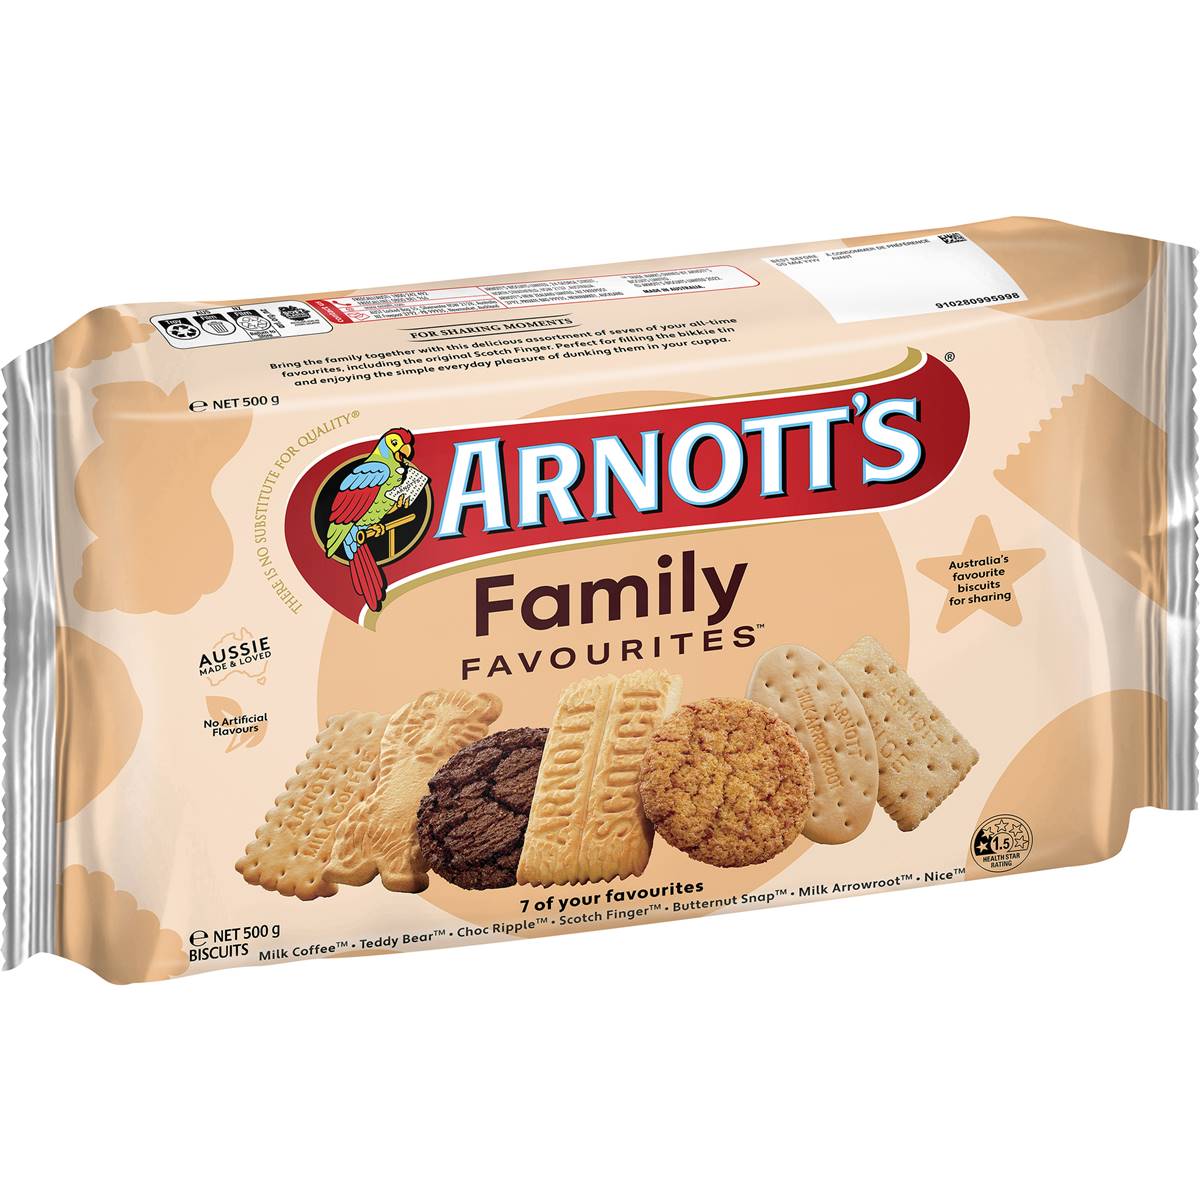 Calories In Arnotts Cream Favourites Assorted Biscuits Calcount 8566